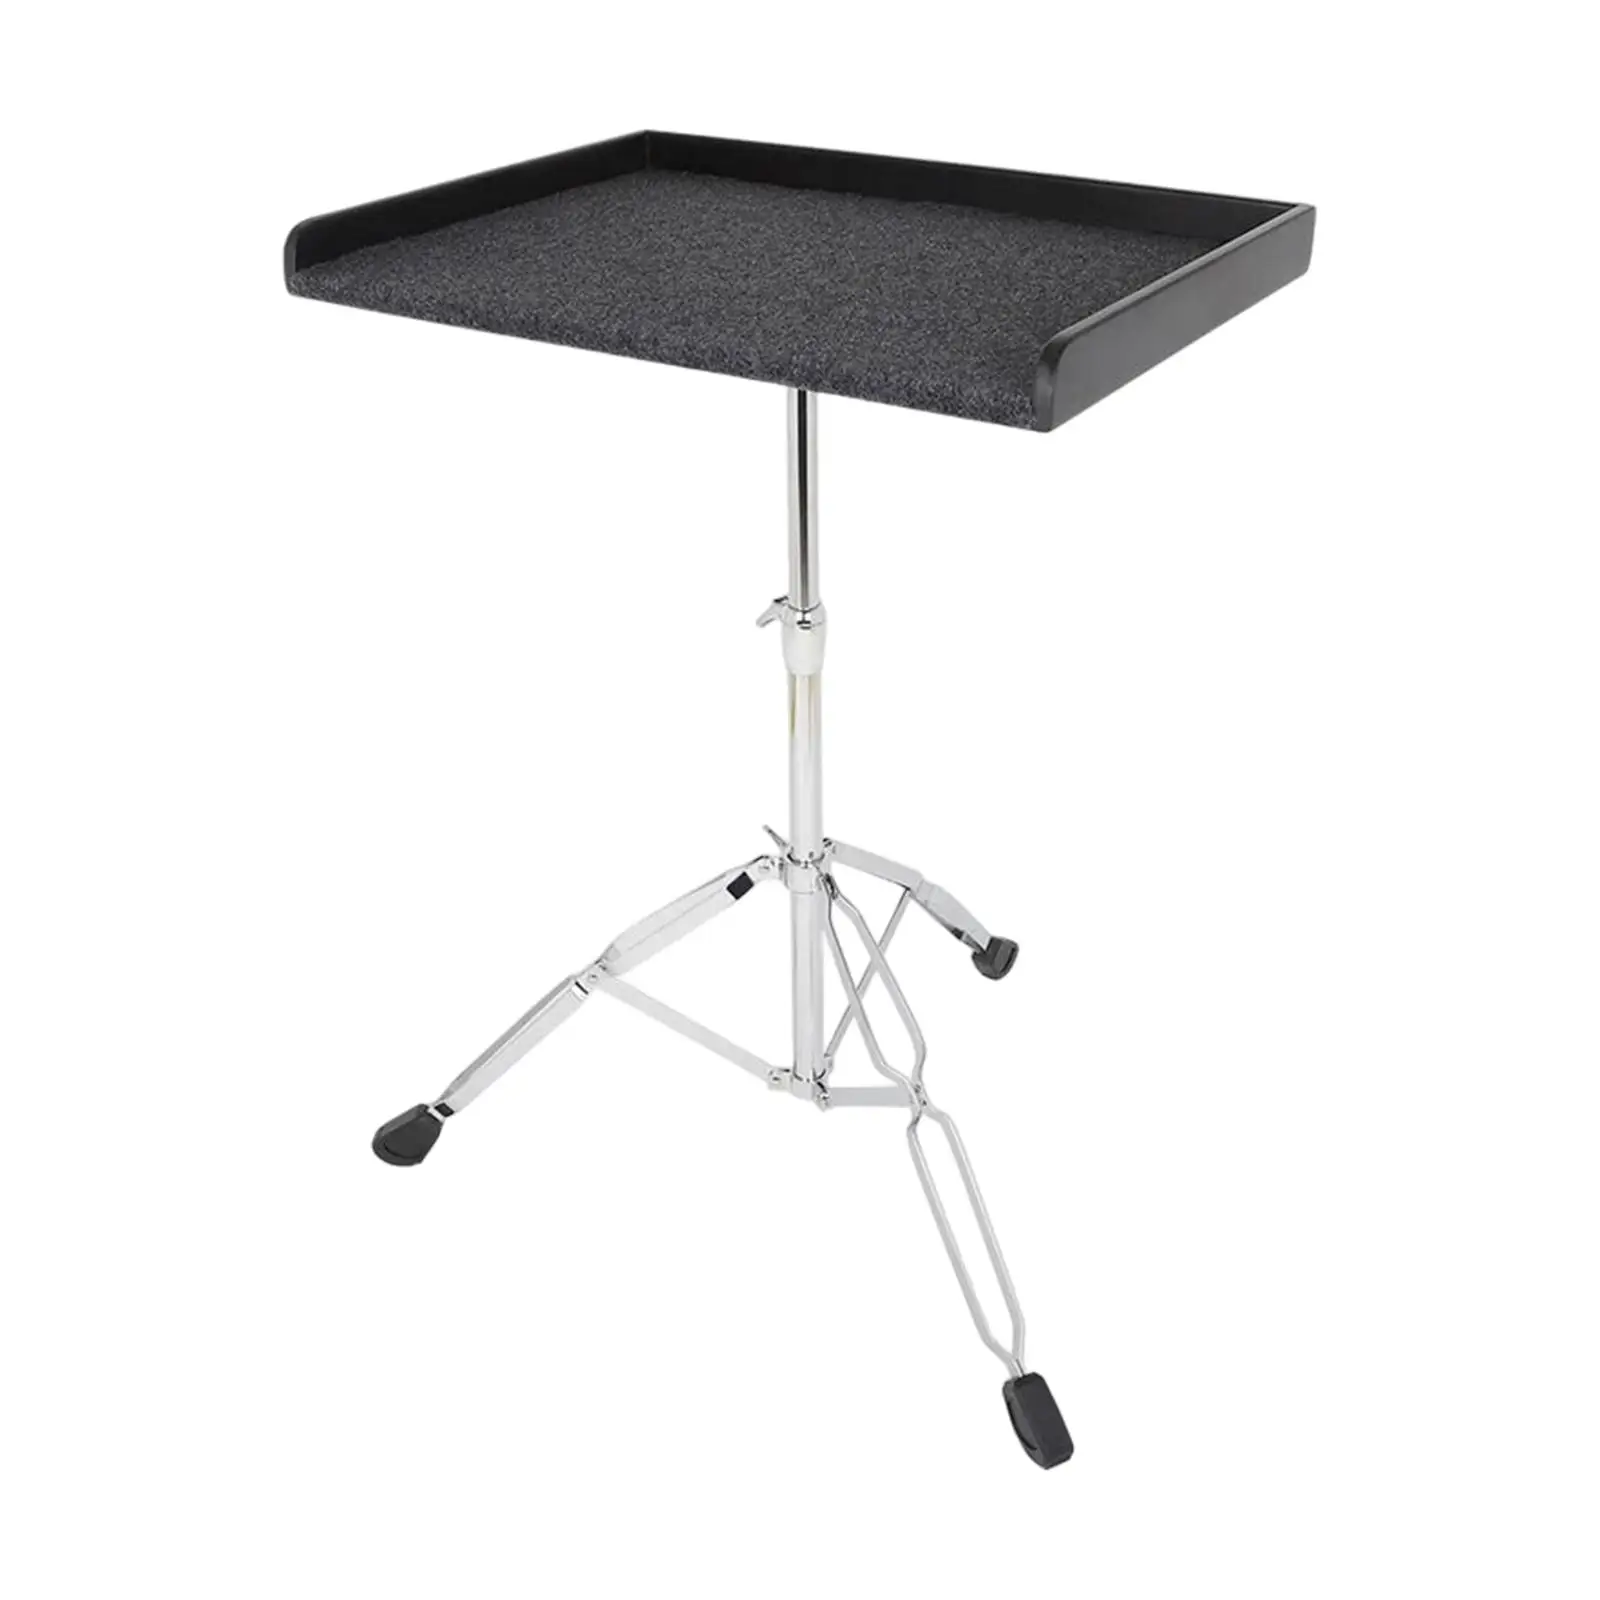 Professional Percussion Table Portable Tripod Stand Adjustable Drum Stool Mount Holder for Workstation Music Gig